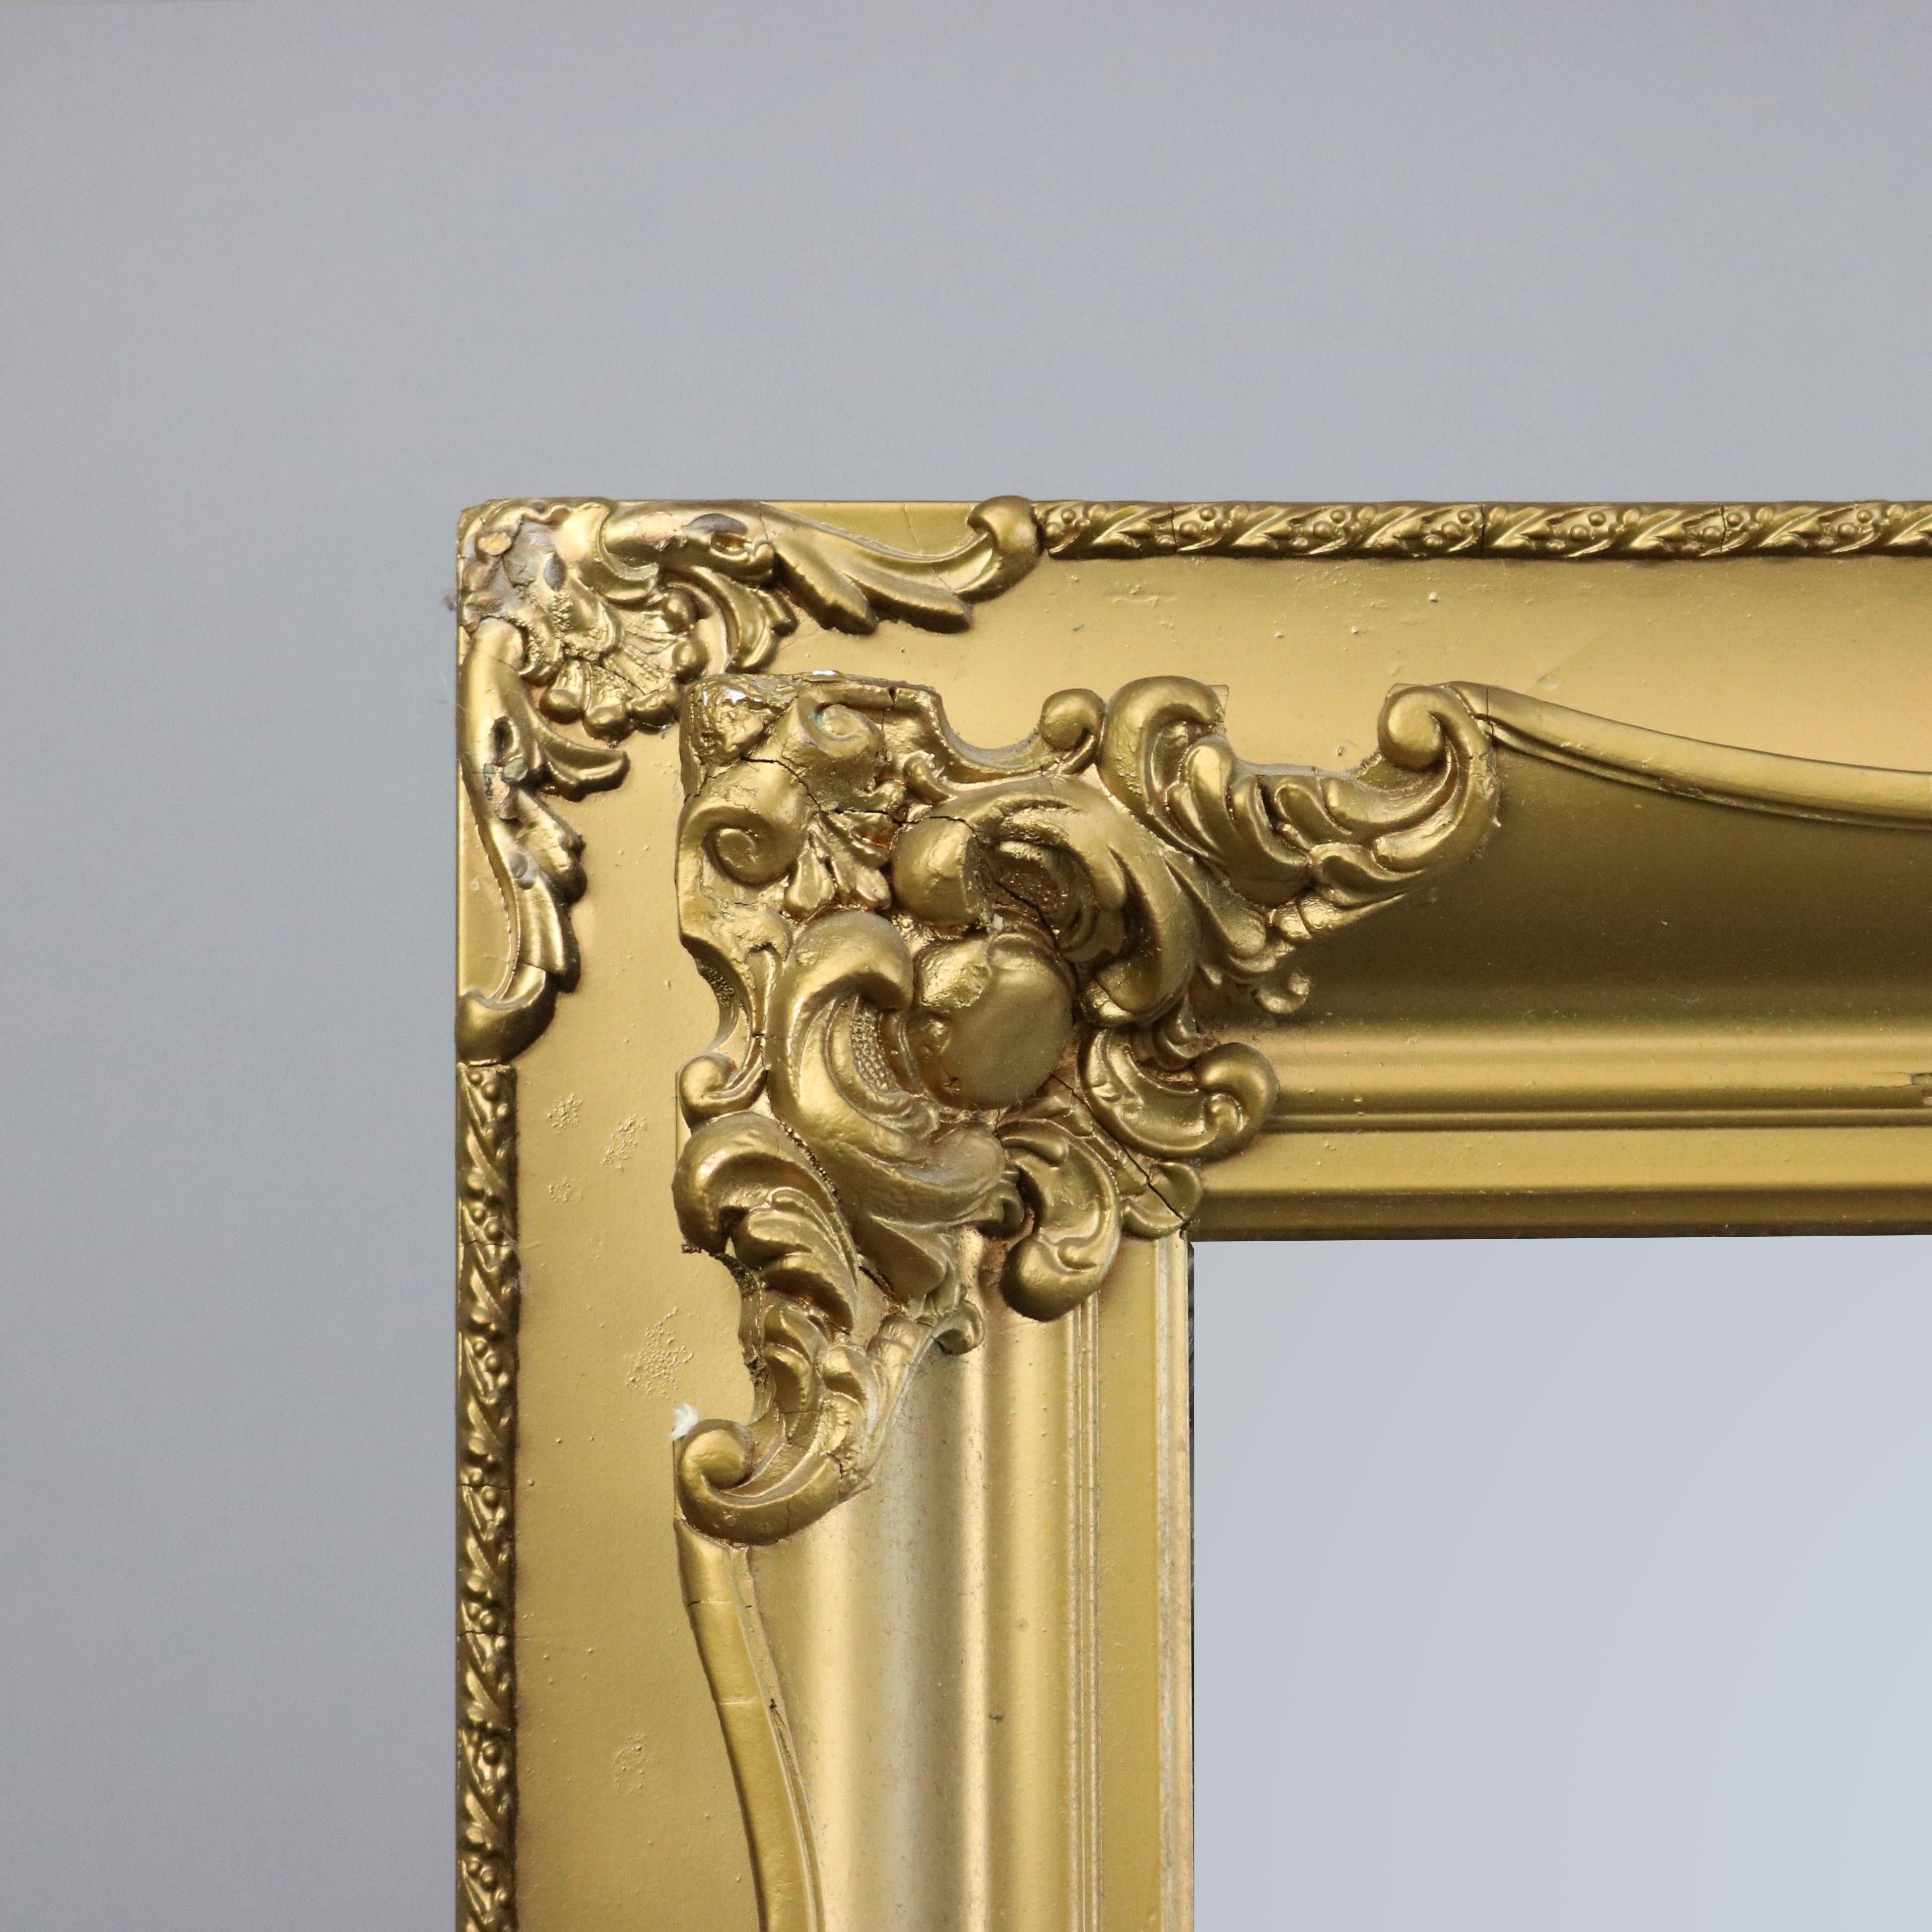 An antique Victorian wall mirror offers sculpted form with scroll and foliate elements, circa 1890.

Measures - 22.75